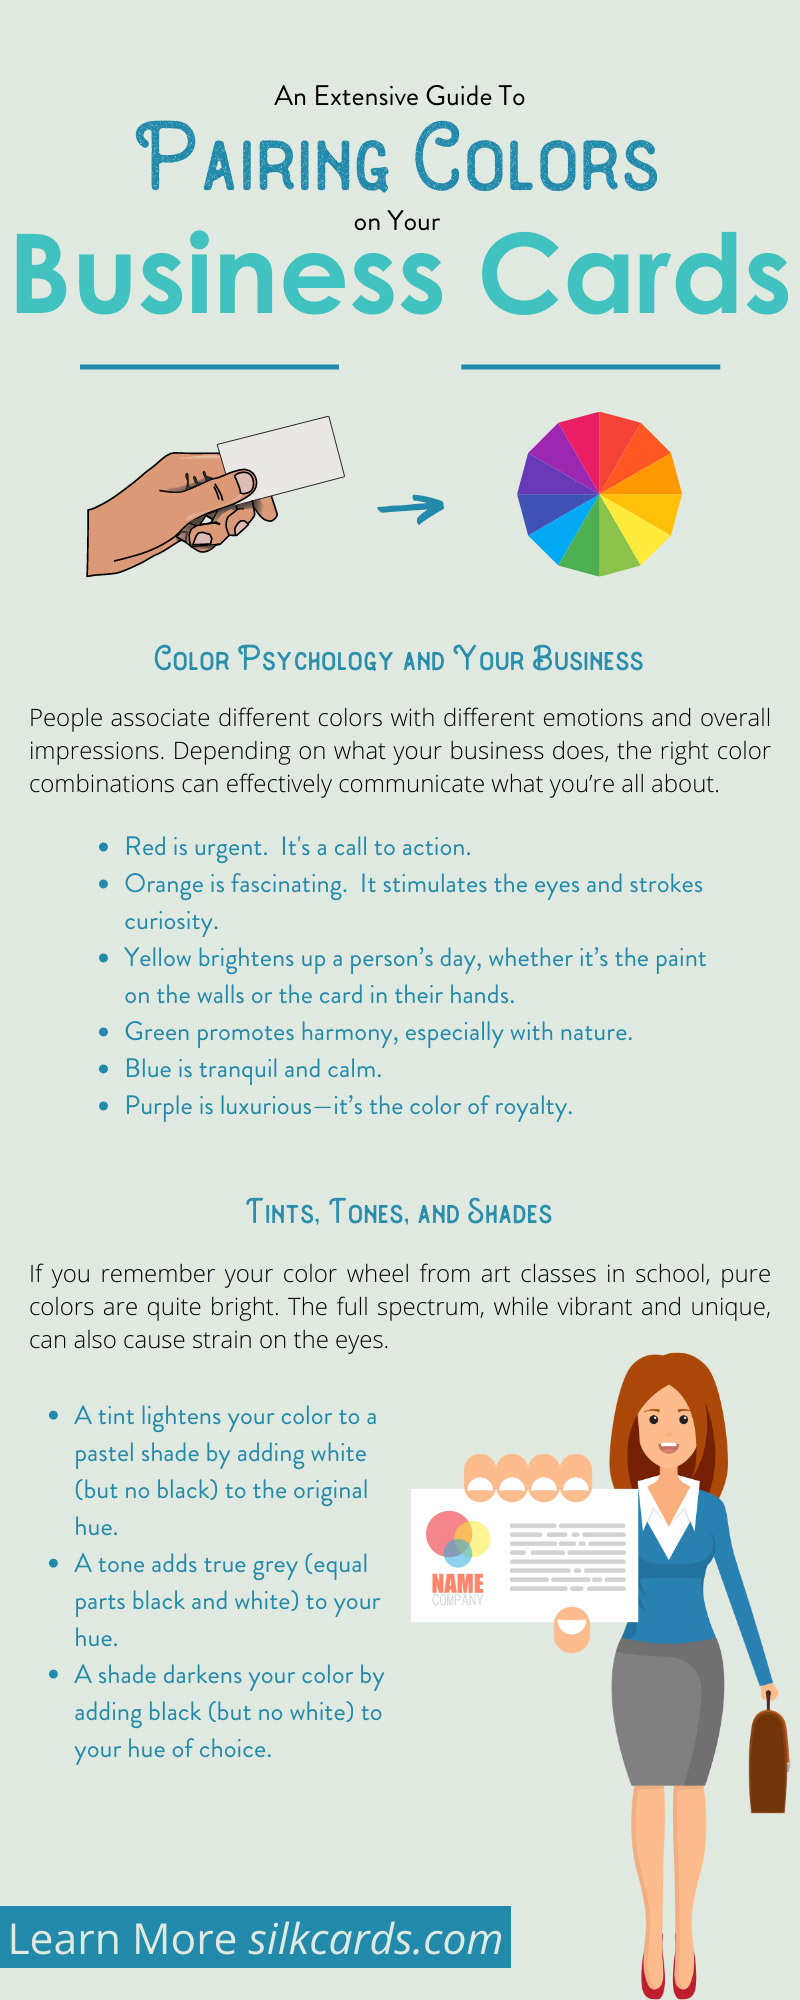 An Extensive Guide To Pairing Colors on Your Business Cards